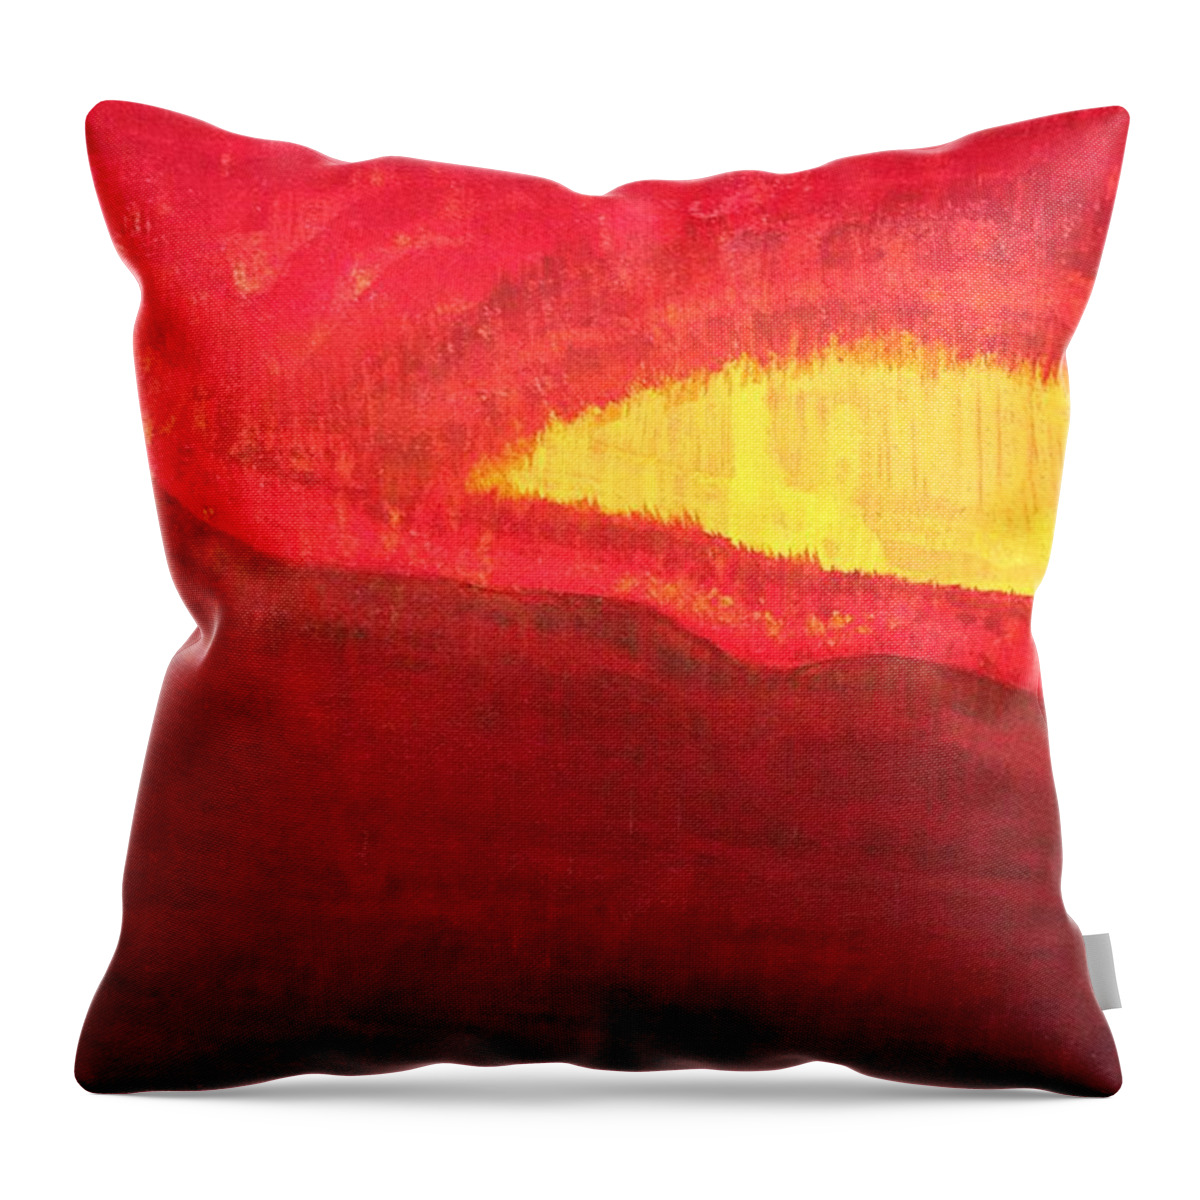 Fire Throw Pillow featuring the painting Wildfire Eye original painting by Sol Luckman